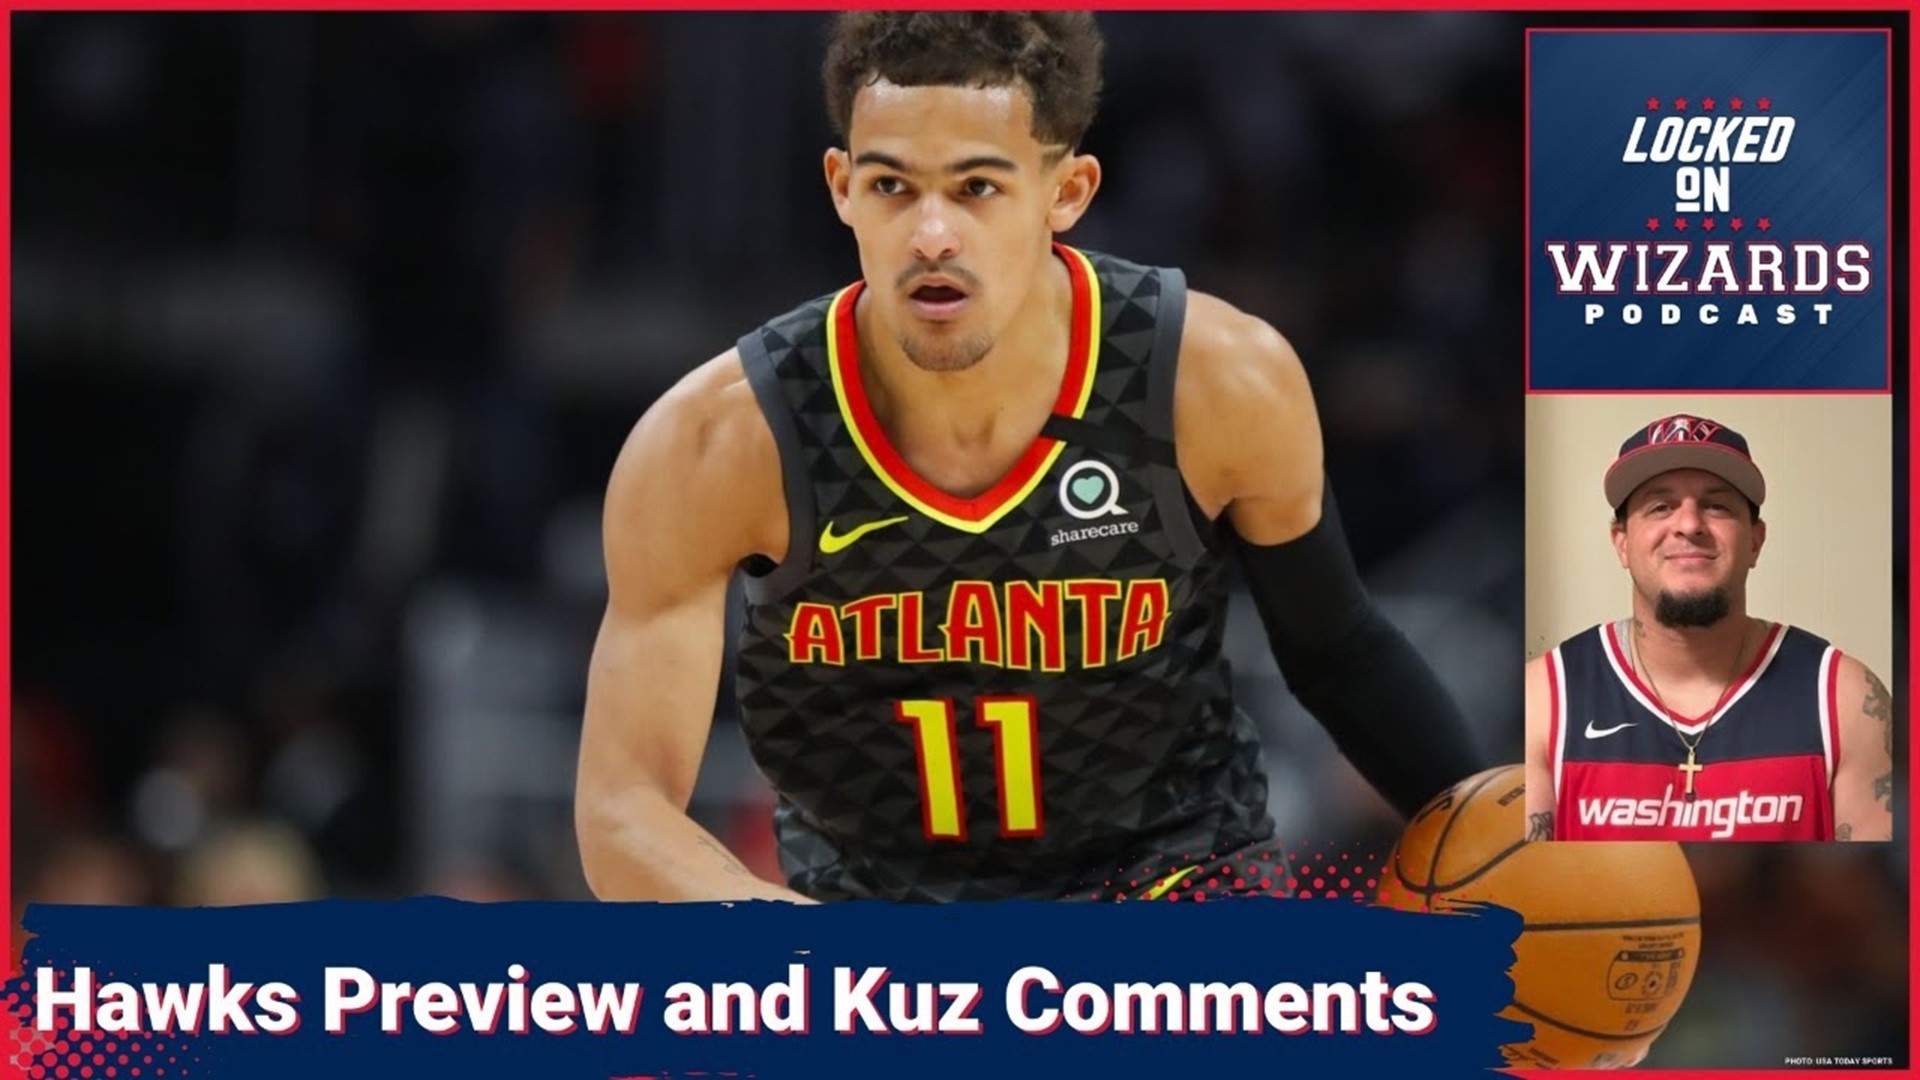 Brandon previews tomorrow night's game vs. the Atlanta Hawks. He addresses and reacts to recent comments made by Kyle Kuzma.